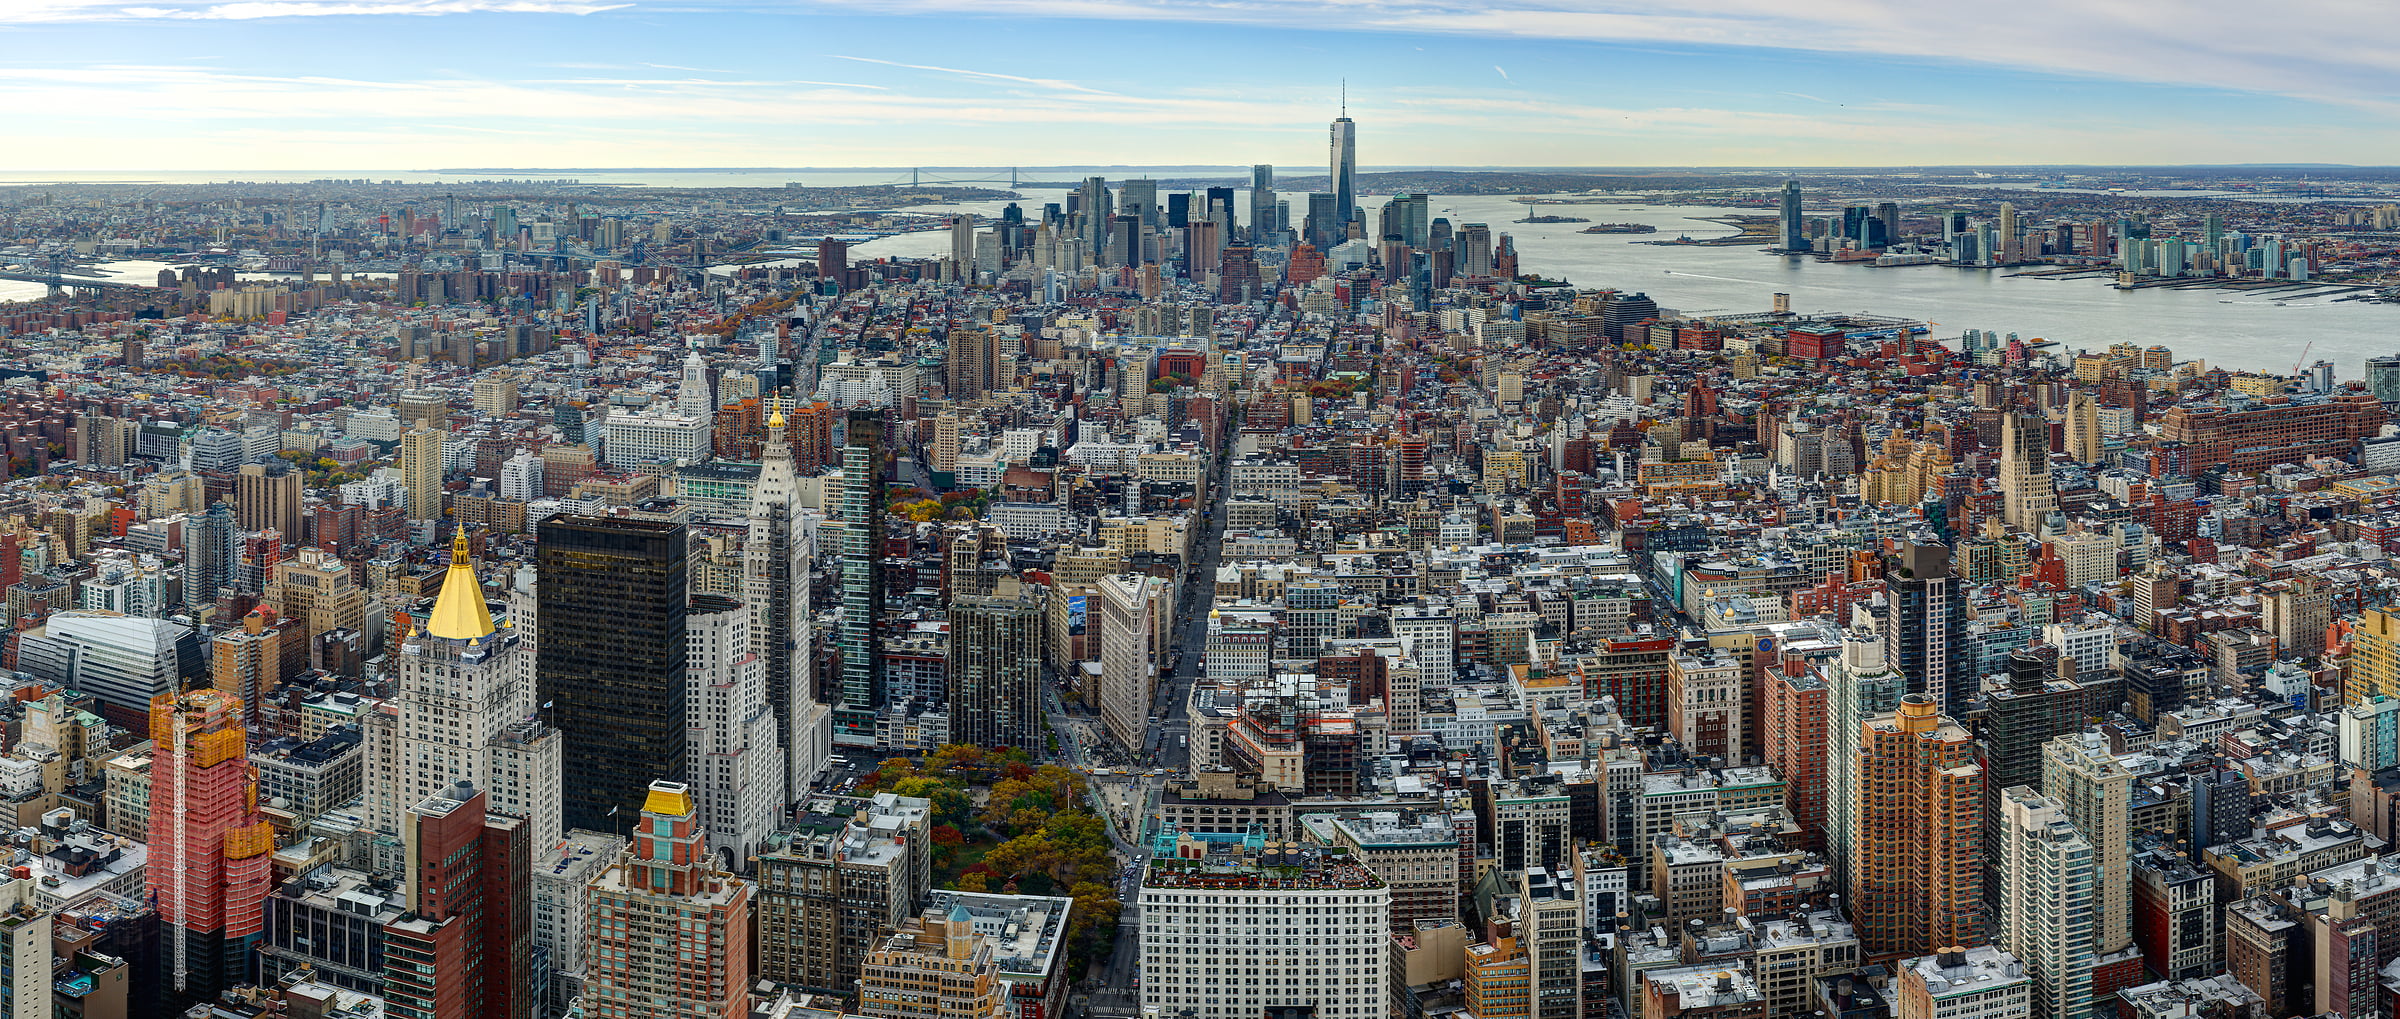 294 megapixels! A very high resolution, large-format VAST photo print of the view from the Empire State Building; aerial cityscape photograph created by Tim Lo Monaco at the Empire State Building in Manhattan, New York, New York.